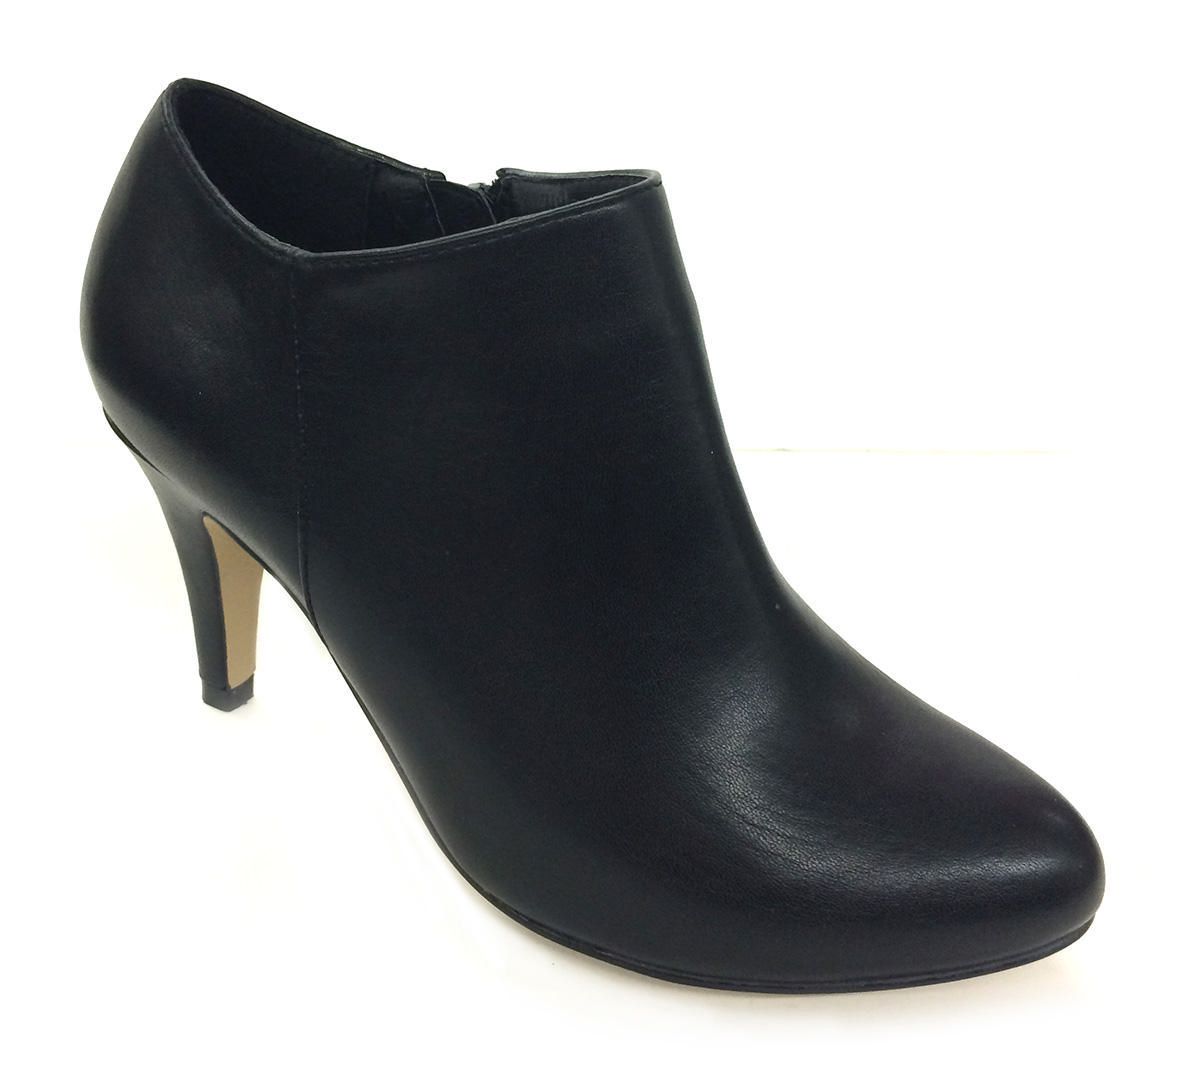 George Women's Ankle Boot | Walmart Canada